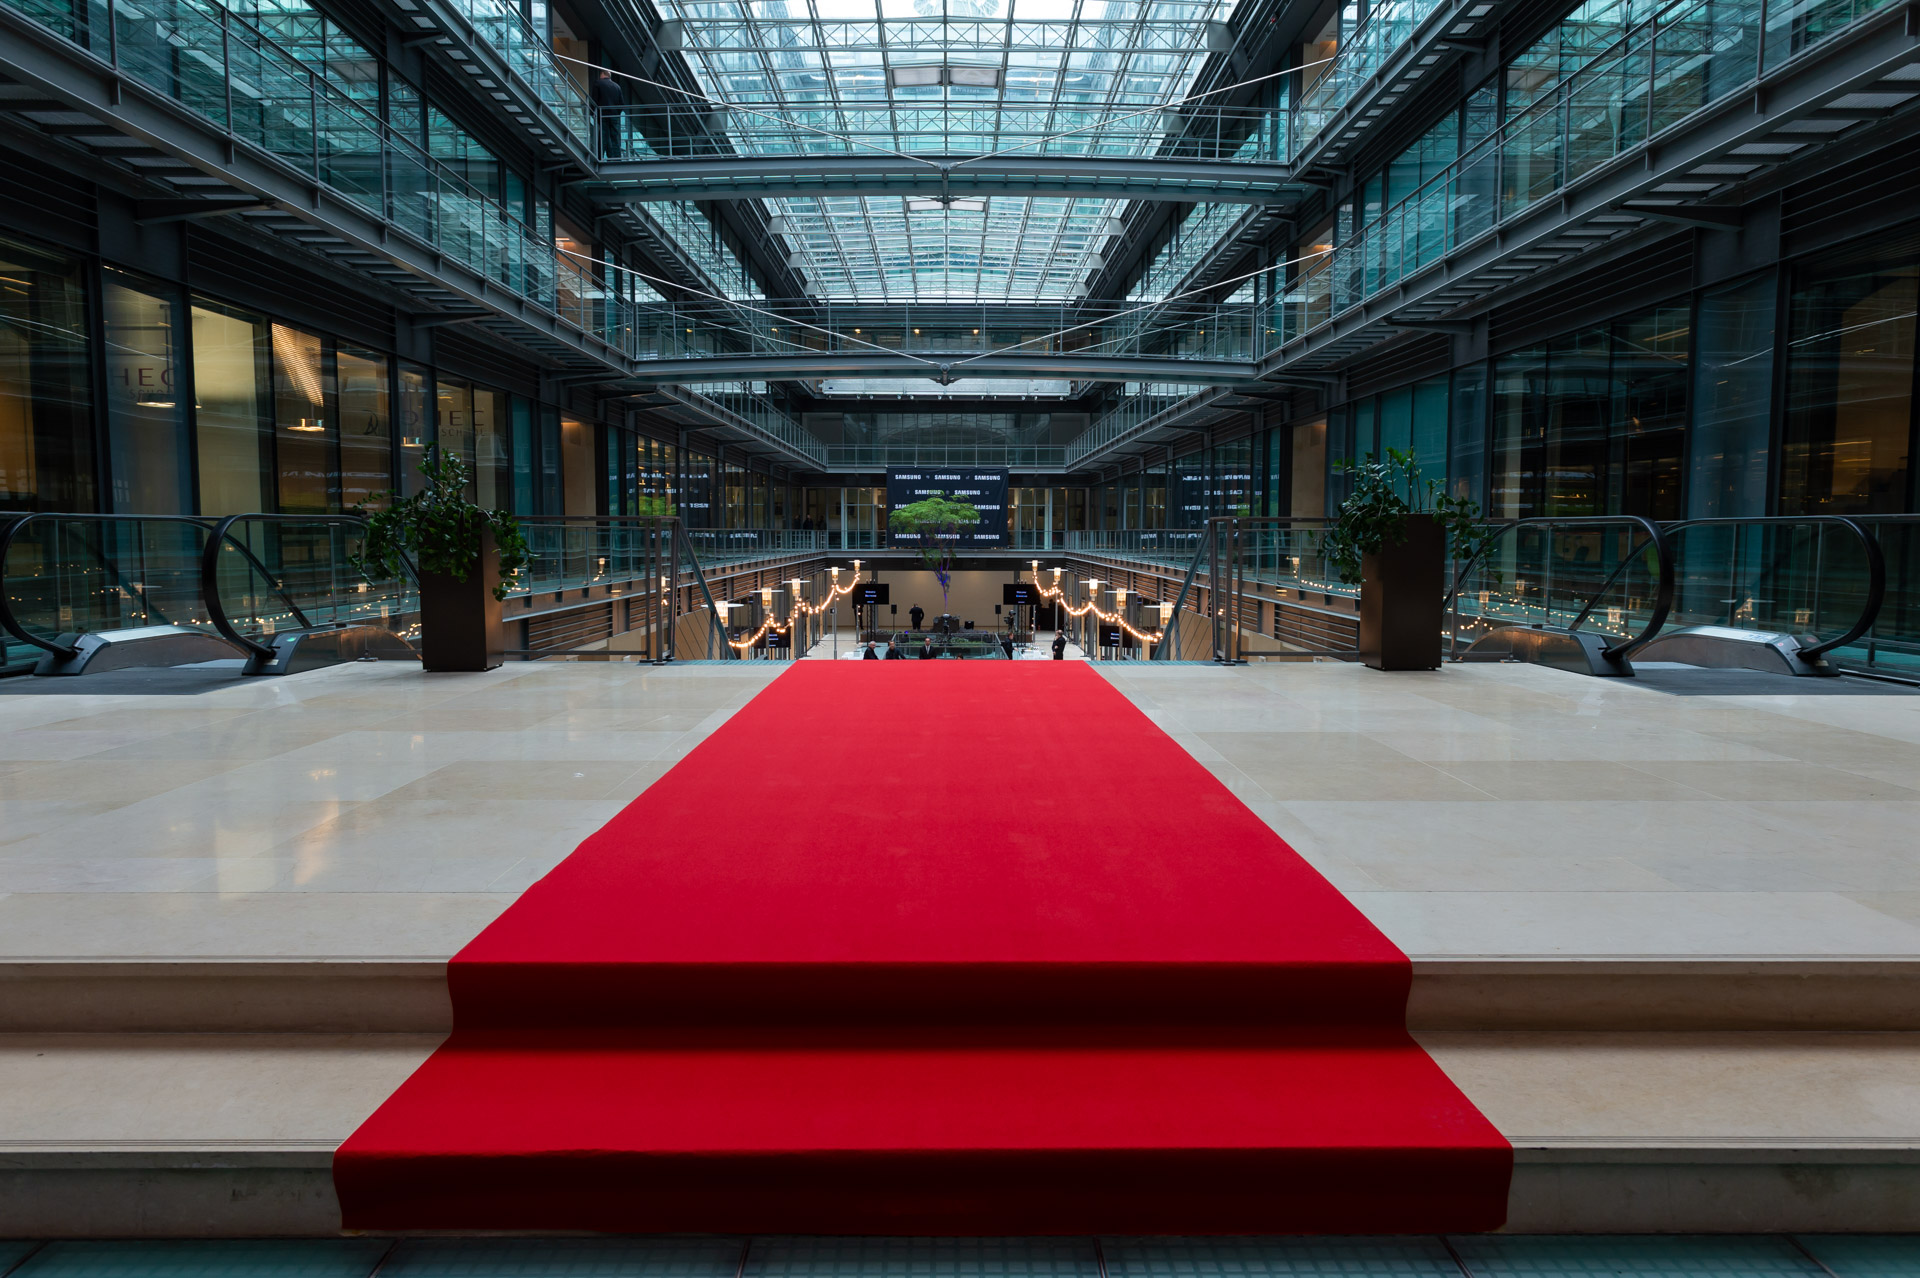 red carpet at the entrance of the event area